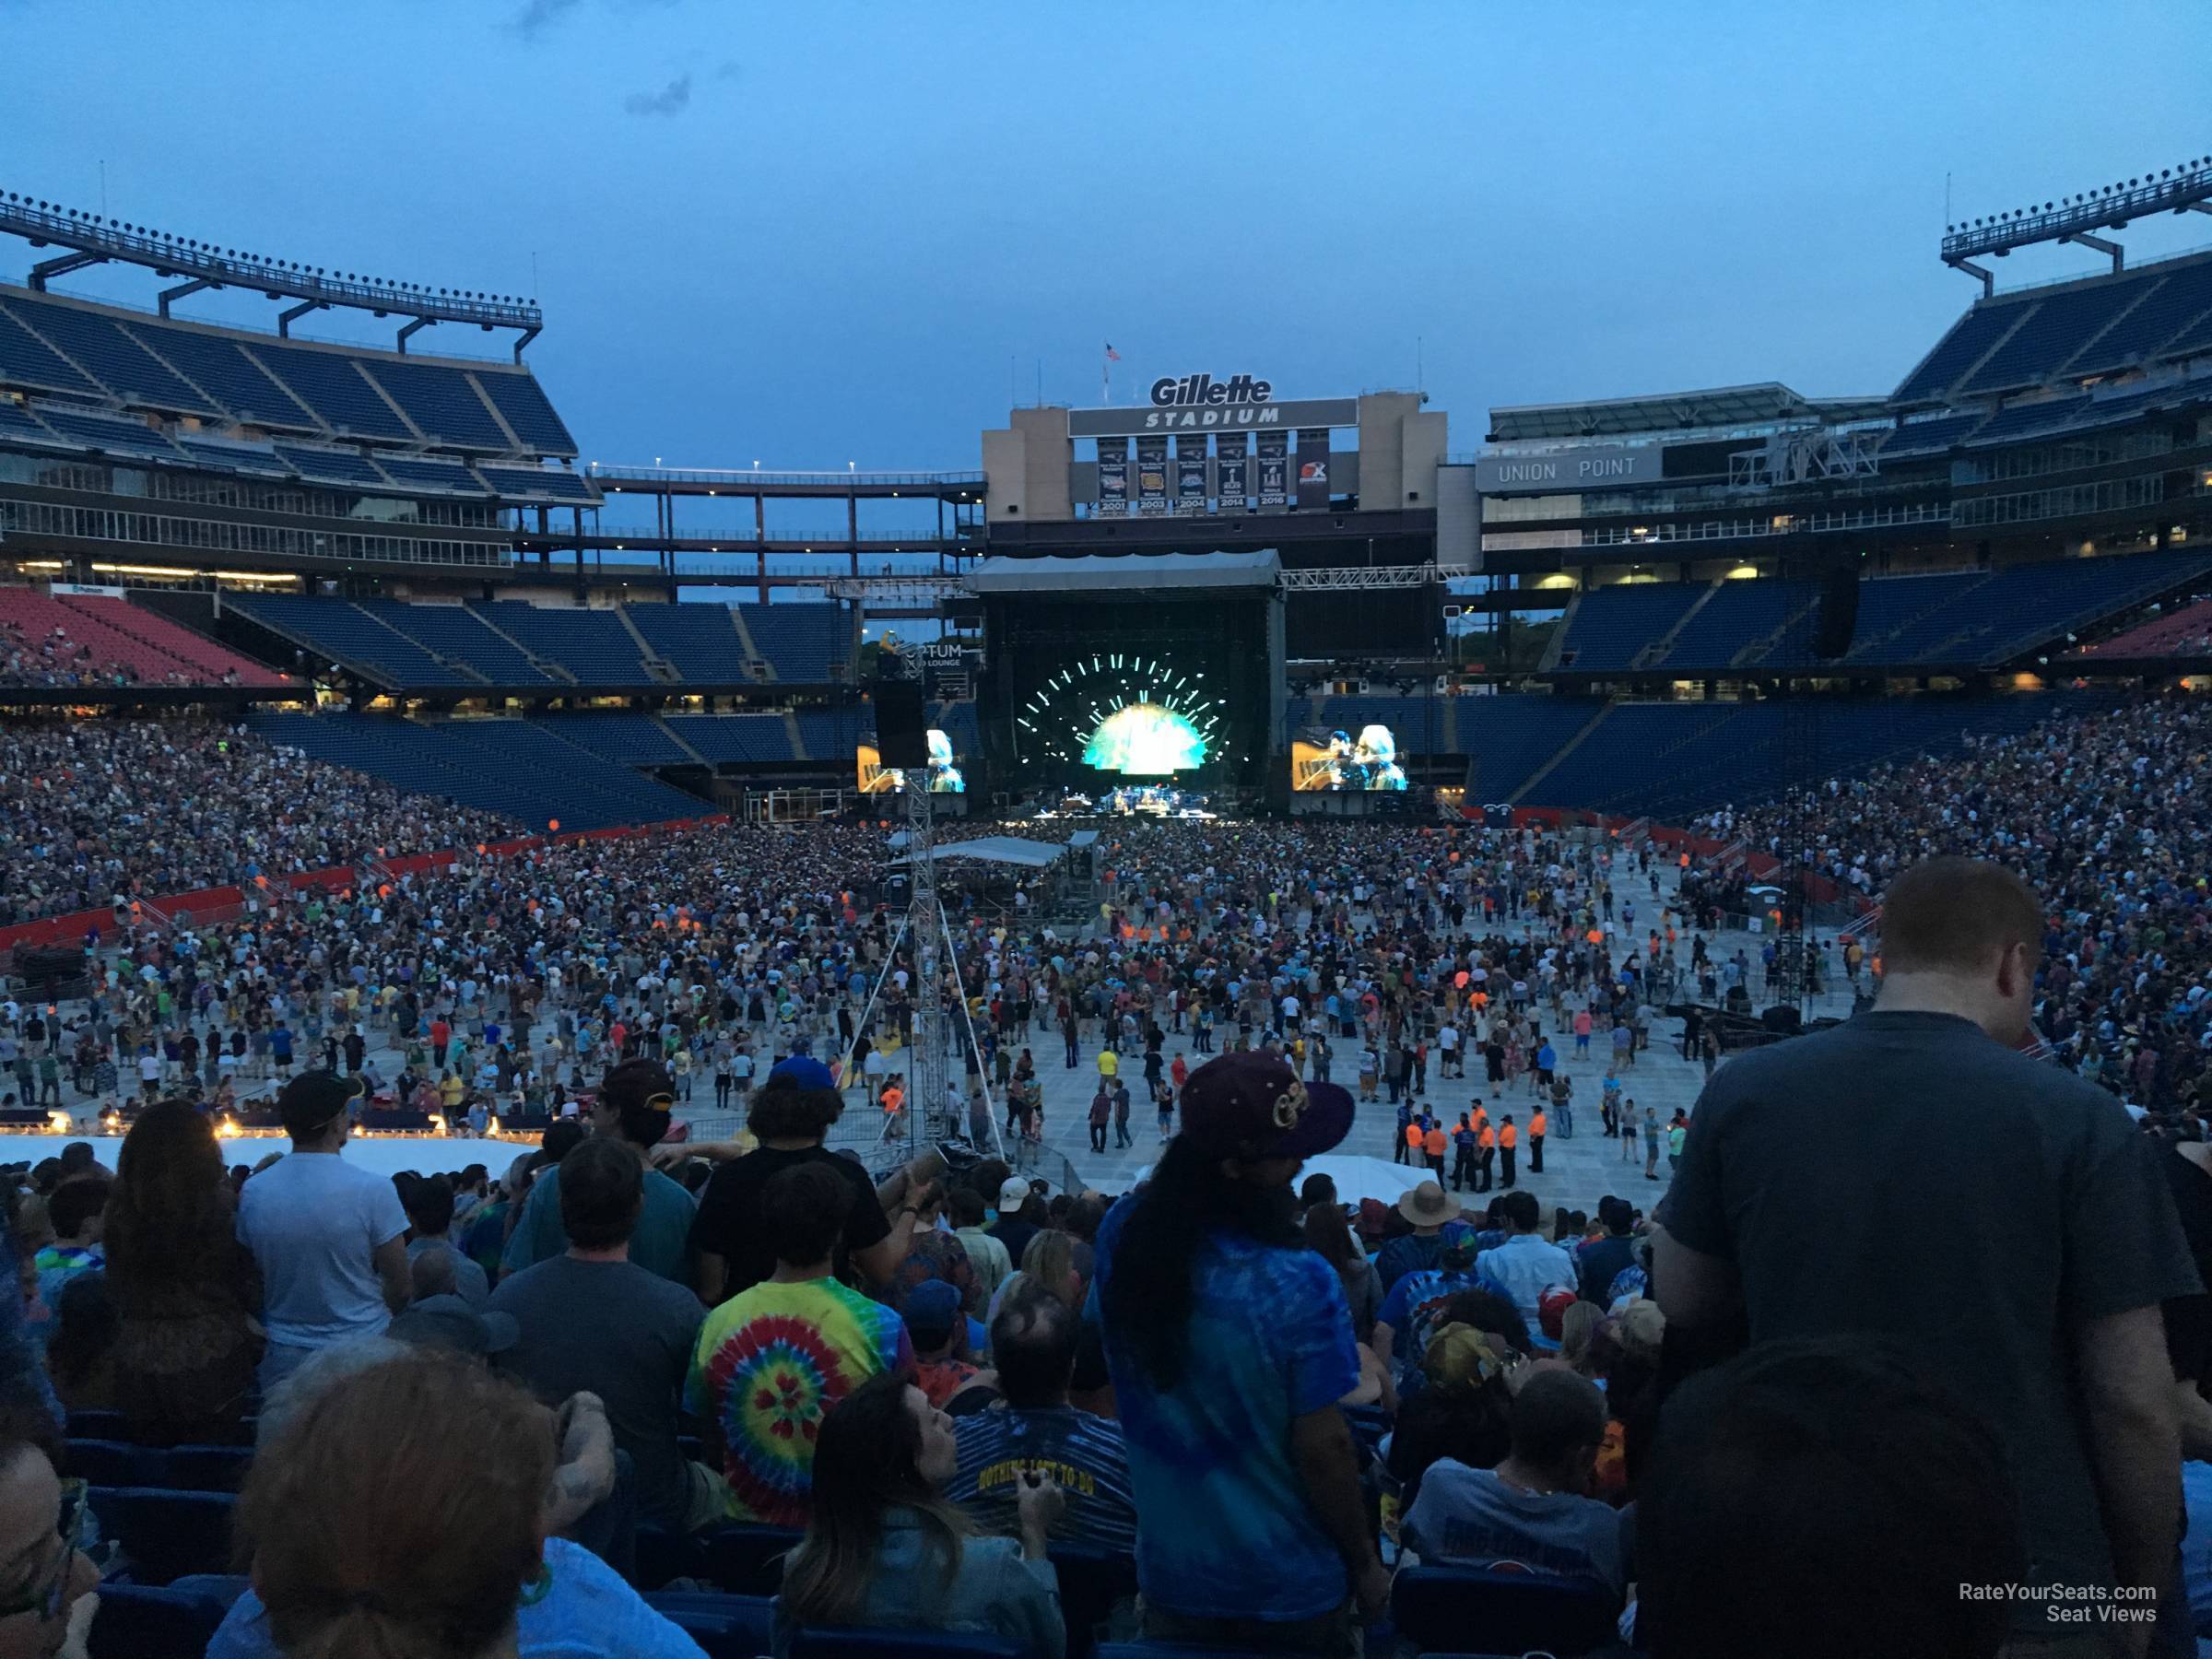 section 141, row 38 seat view  for concert - gillette stadium